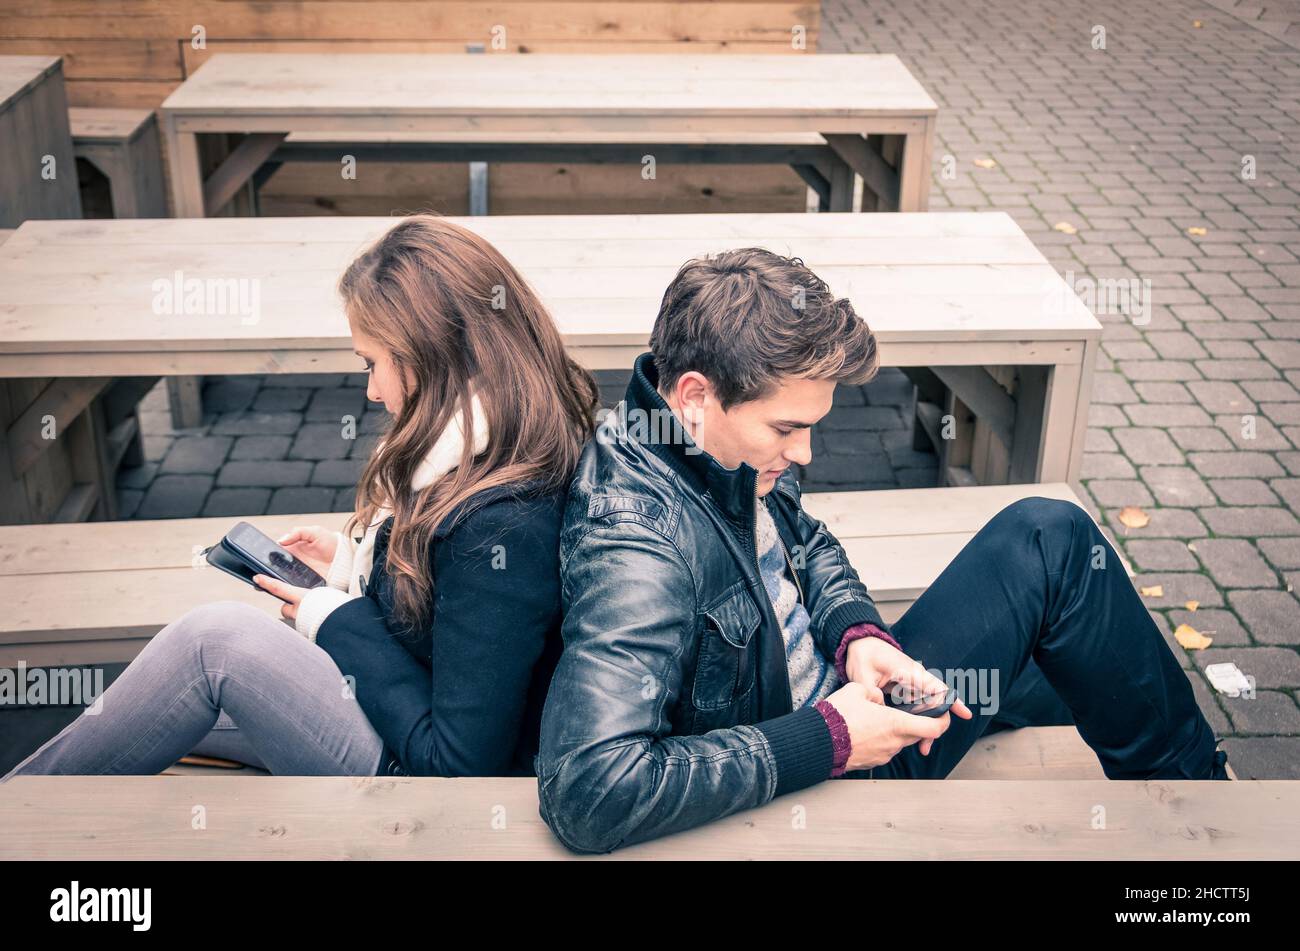 Couple in a modern common phase of mutual disinterest Stock Photo